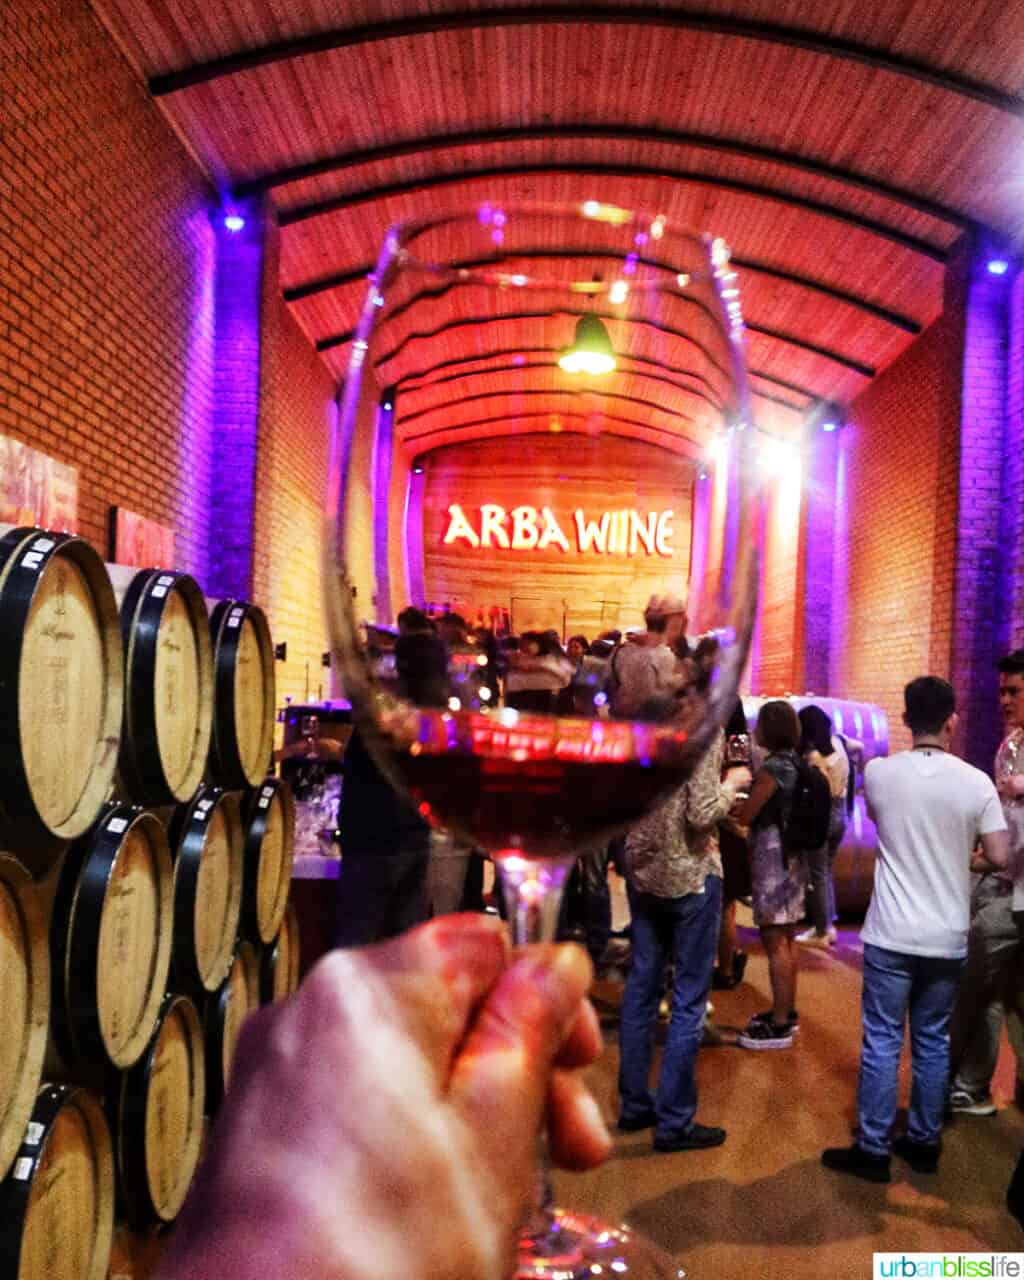 hand holding up a glass of red Kazakh wine with the Arbe Wine lighted logo on the wall in the background and wine barrels on the sides.